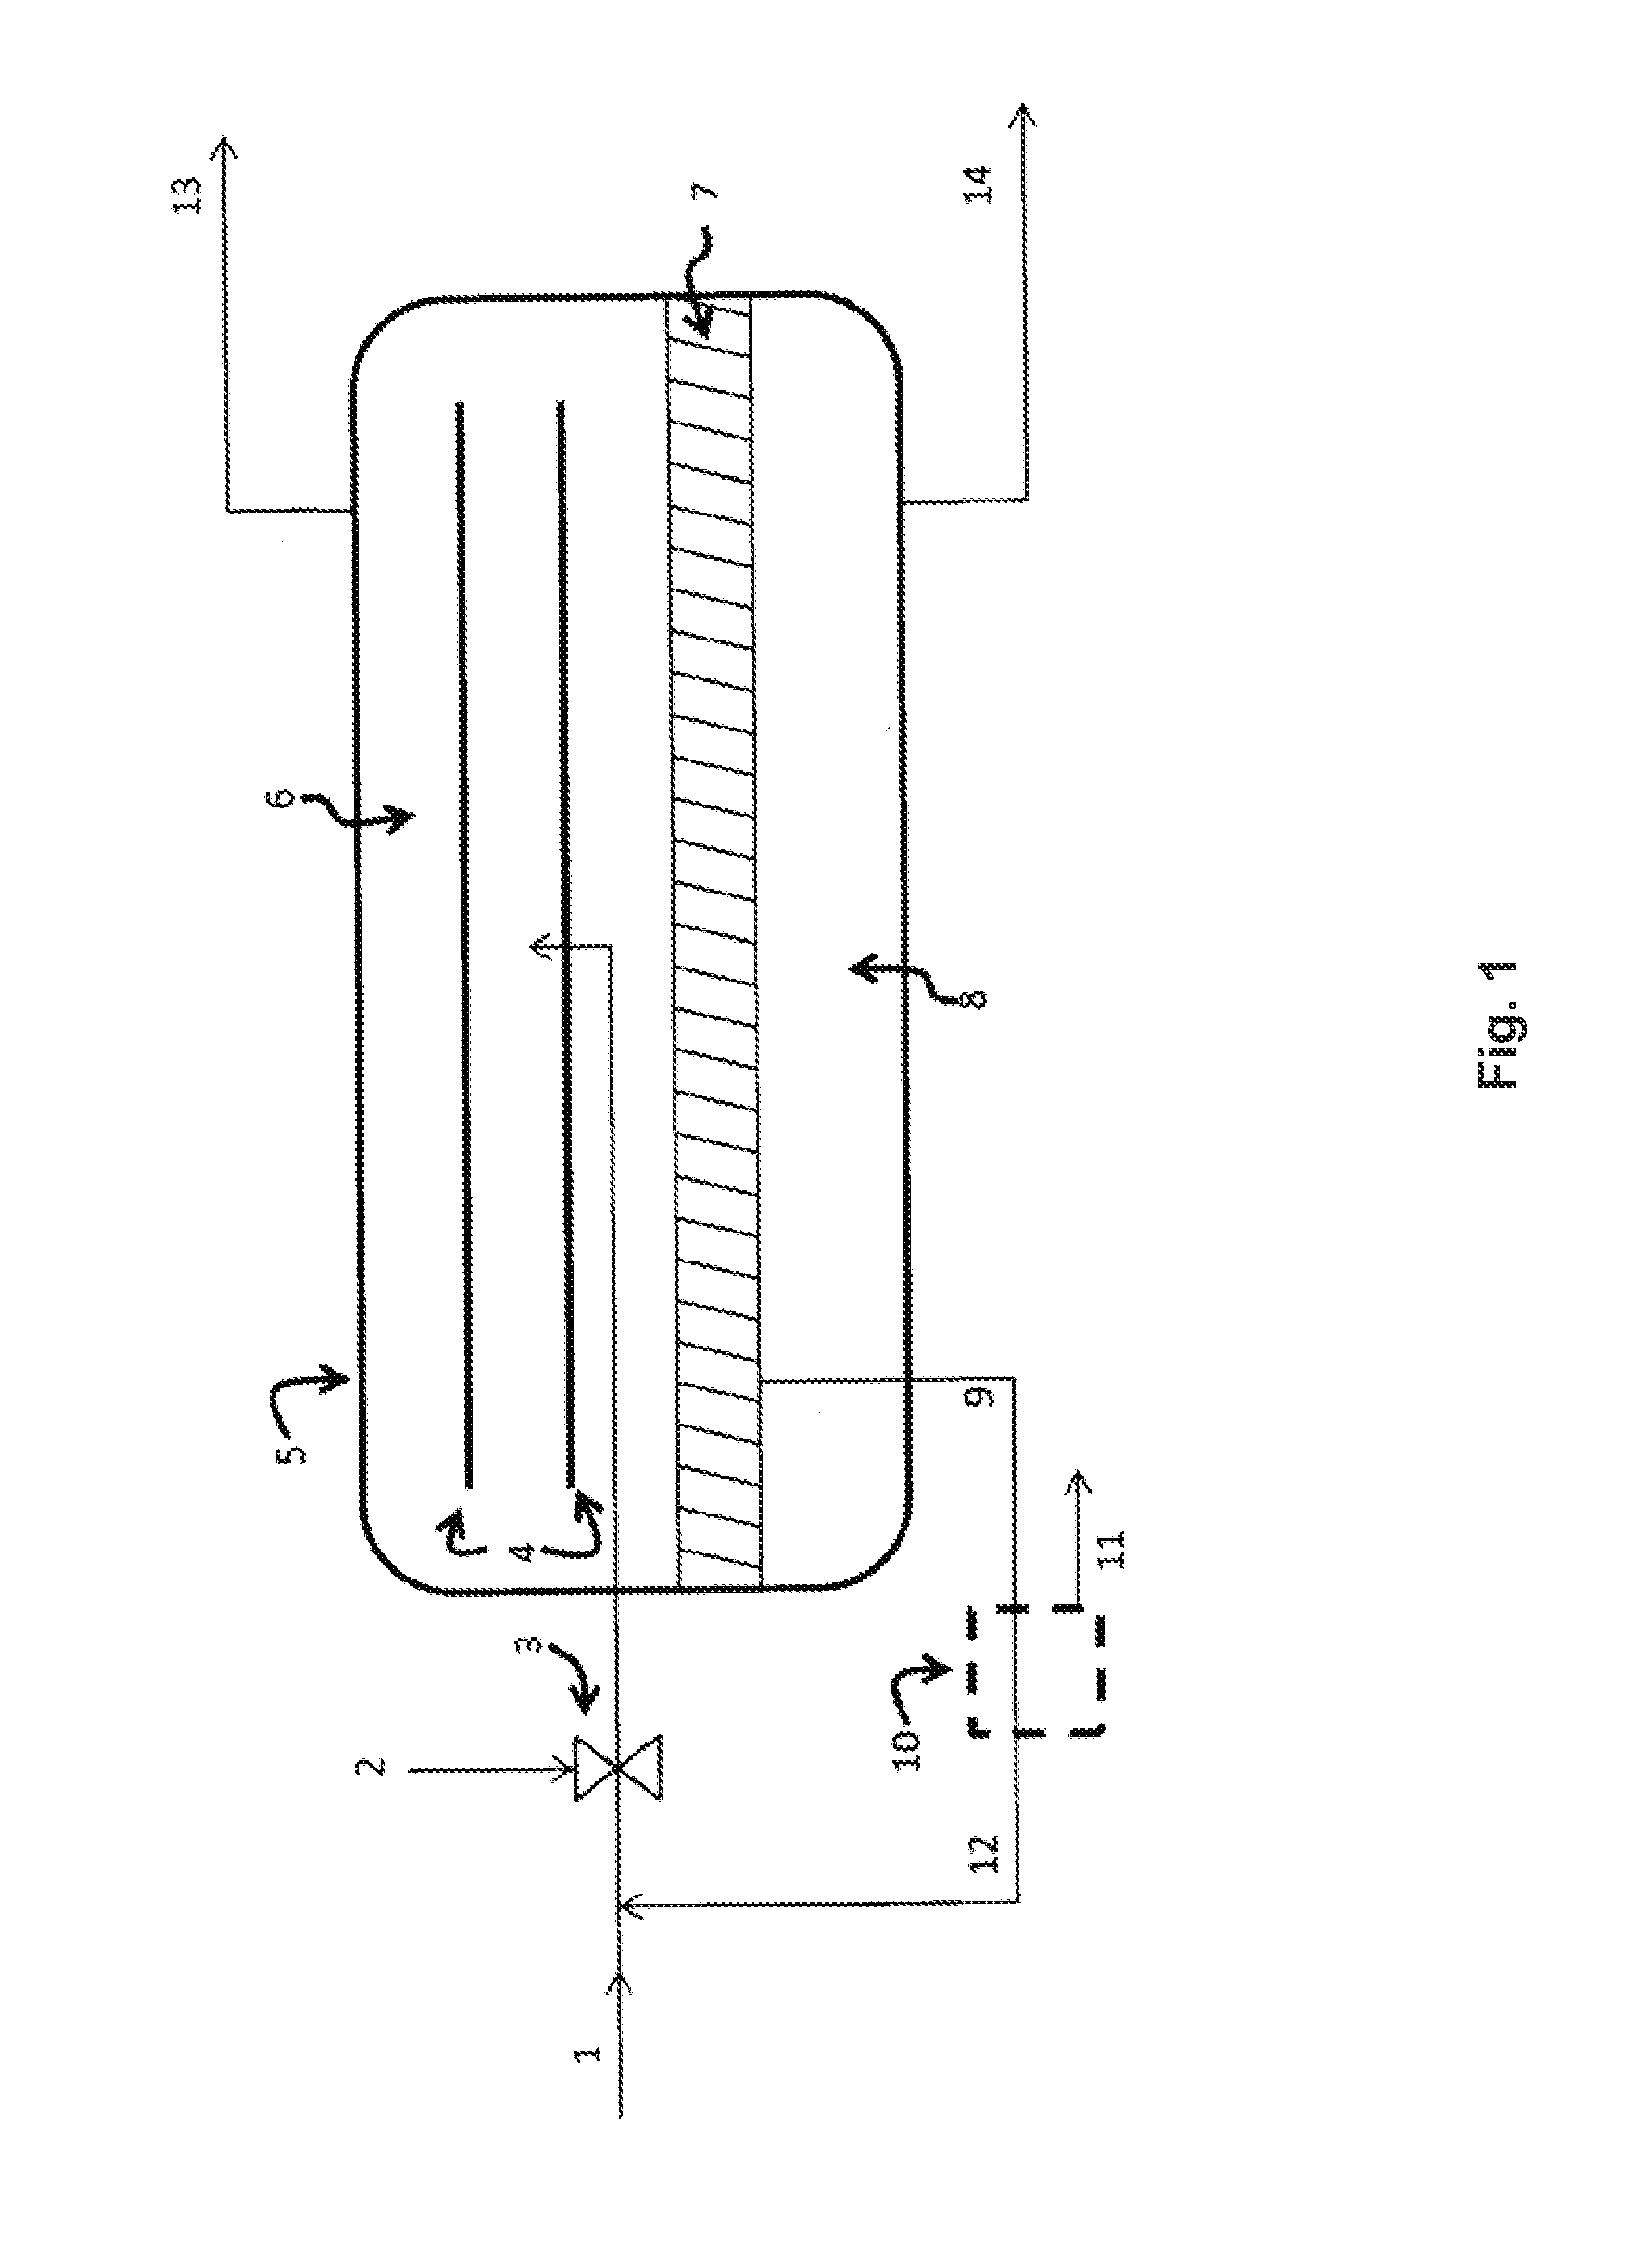 Desalter emulsion separation by emulsion recycle